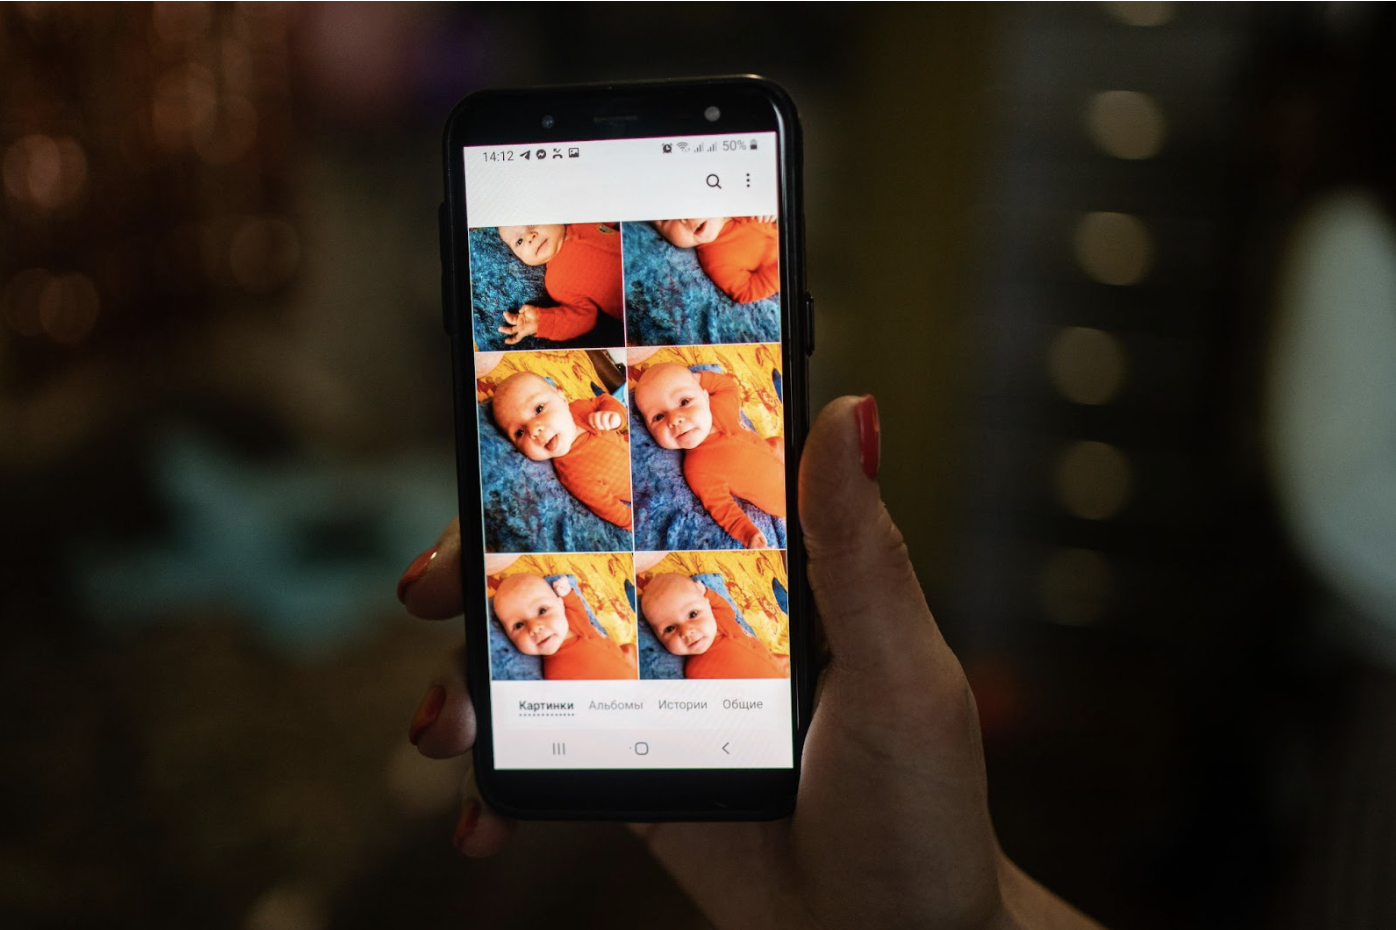 A hand holding a cell phone. On the phone screen there are photos of babies.